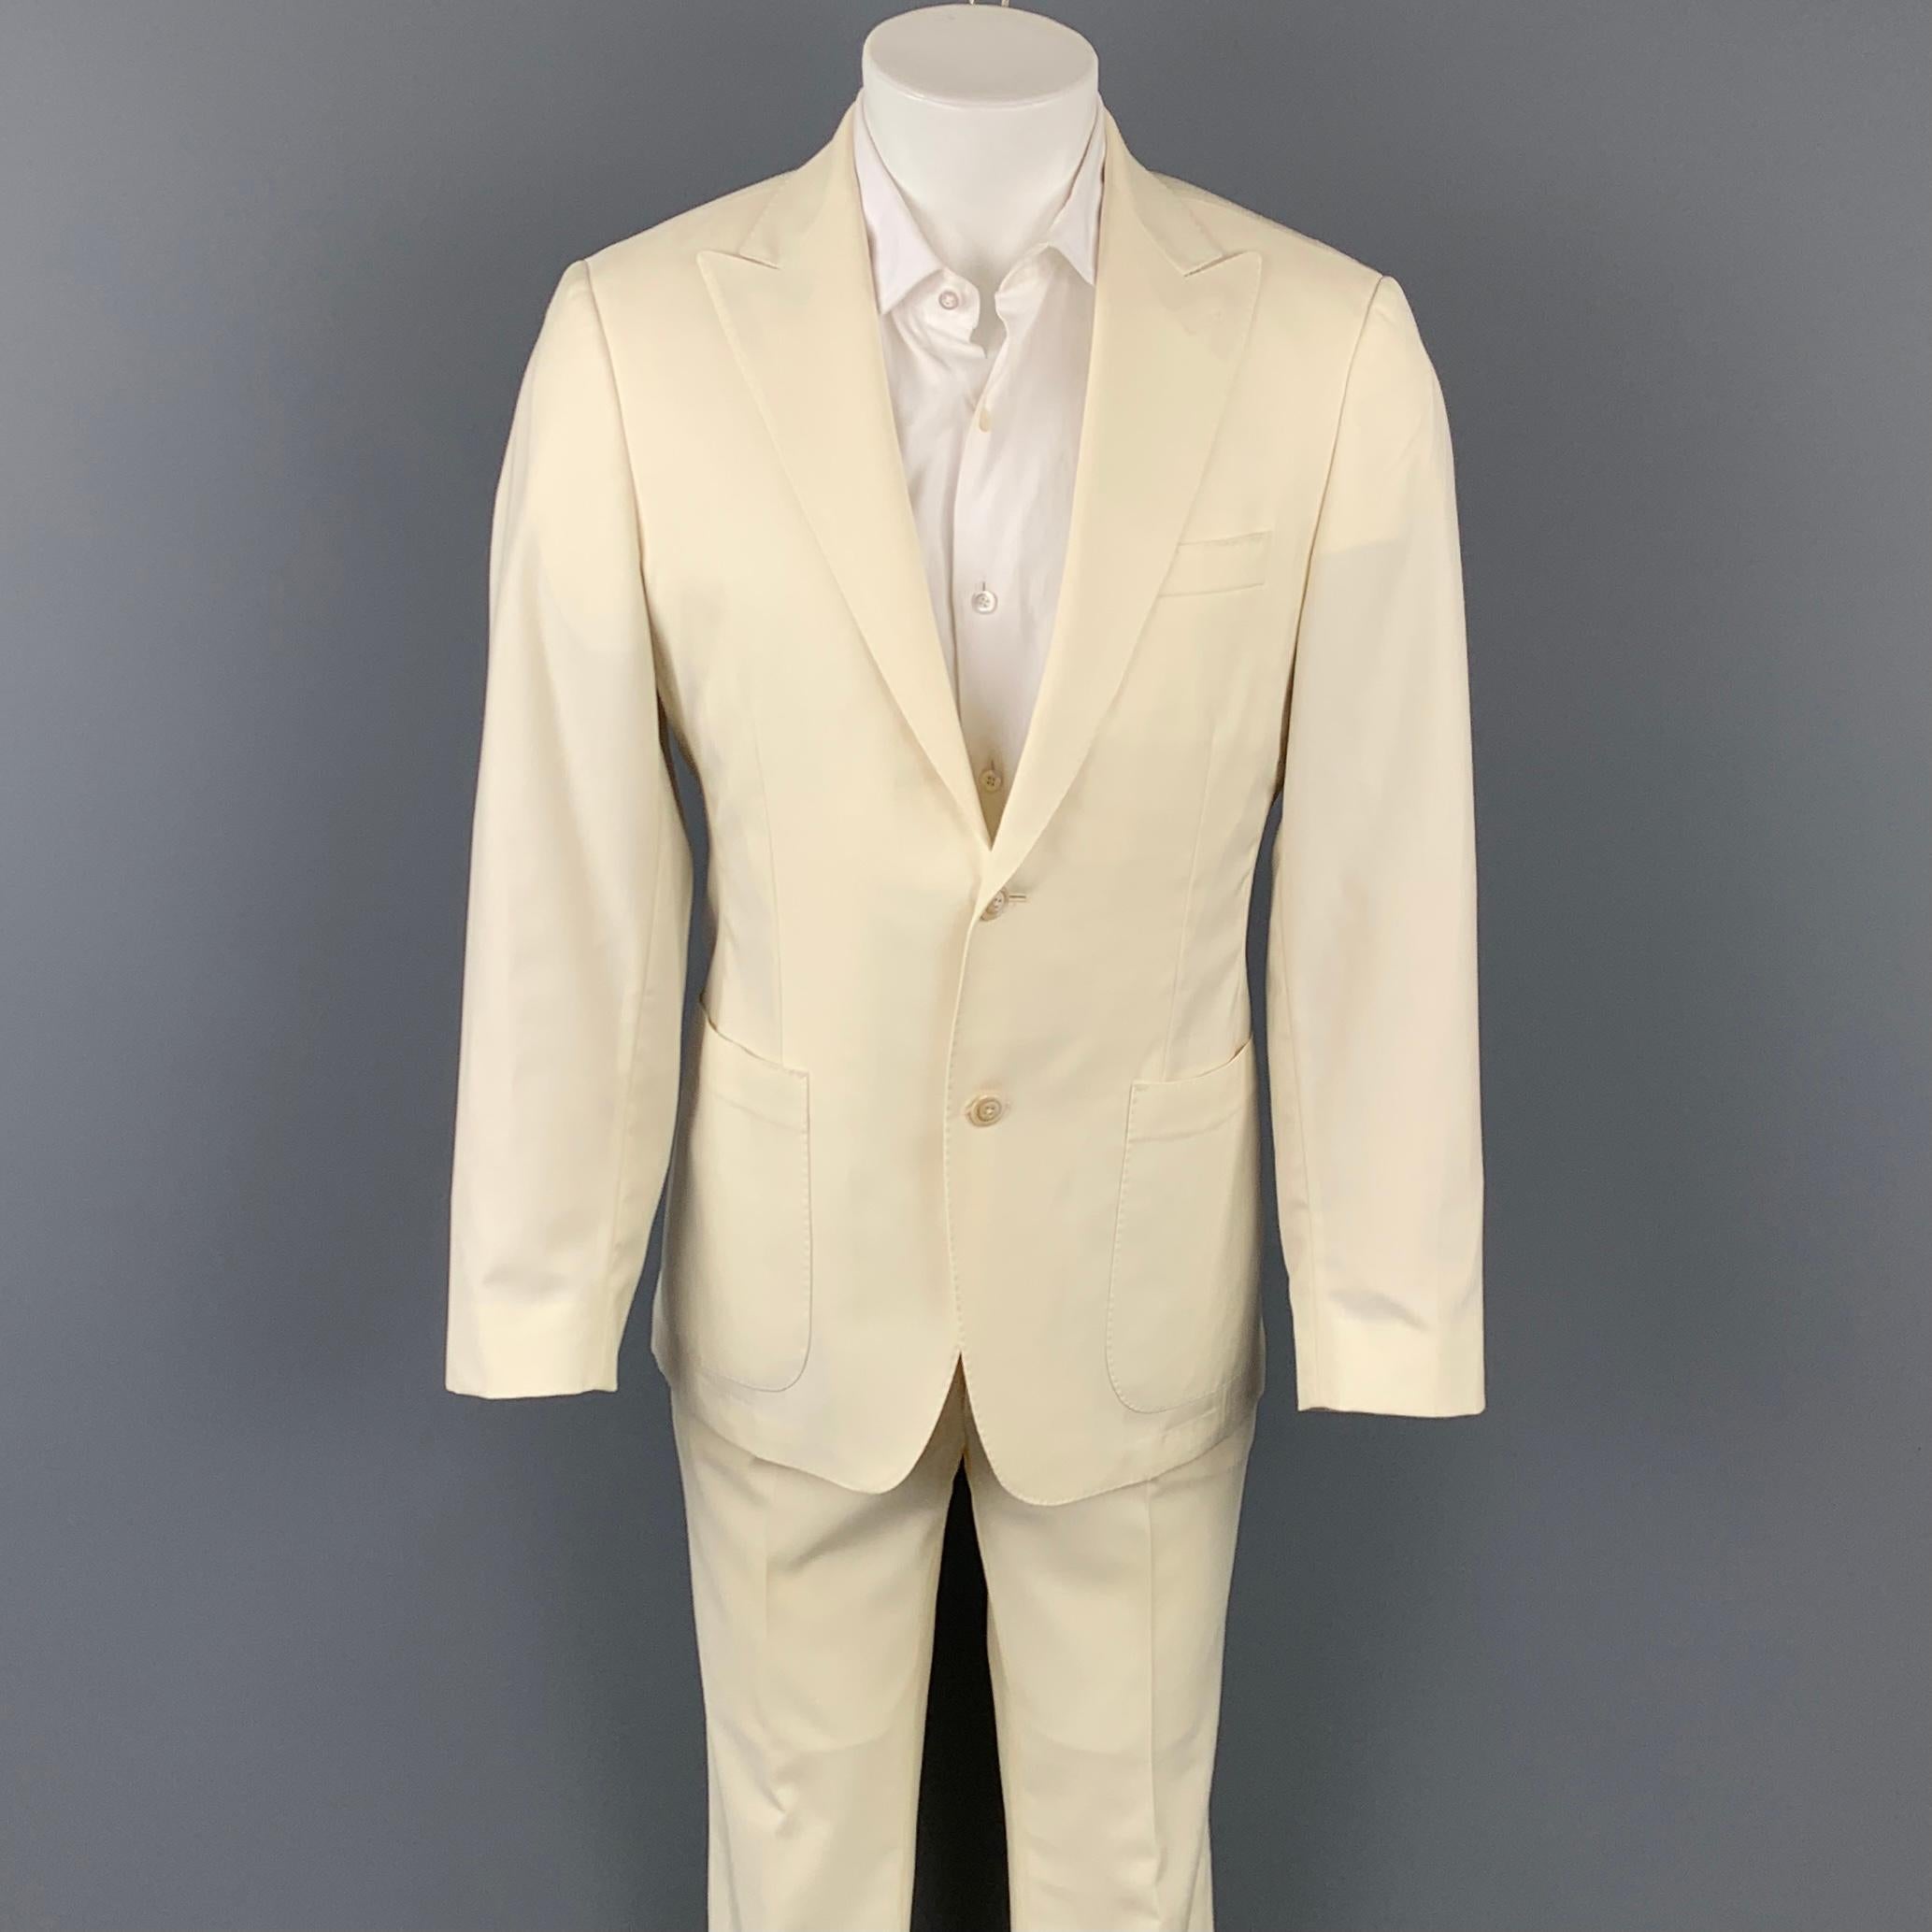 SAMUELSOHN for WILKES BASHFORD suit comes in a cream wool with a half liner and includes a single breasted, two button sport coat with a peak lapel and matching flat front trousers.

Very Good Pre-Owned Condition.
Marked: